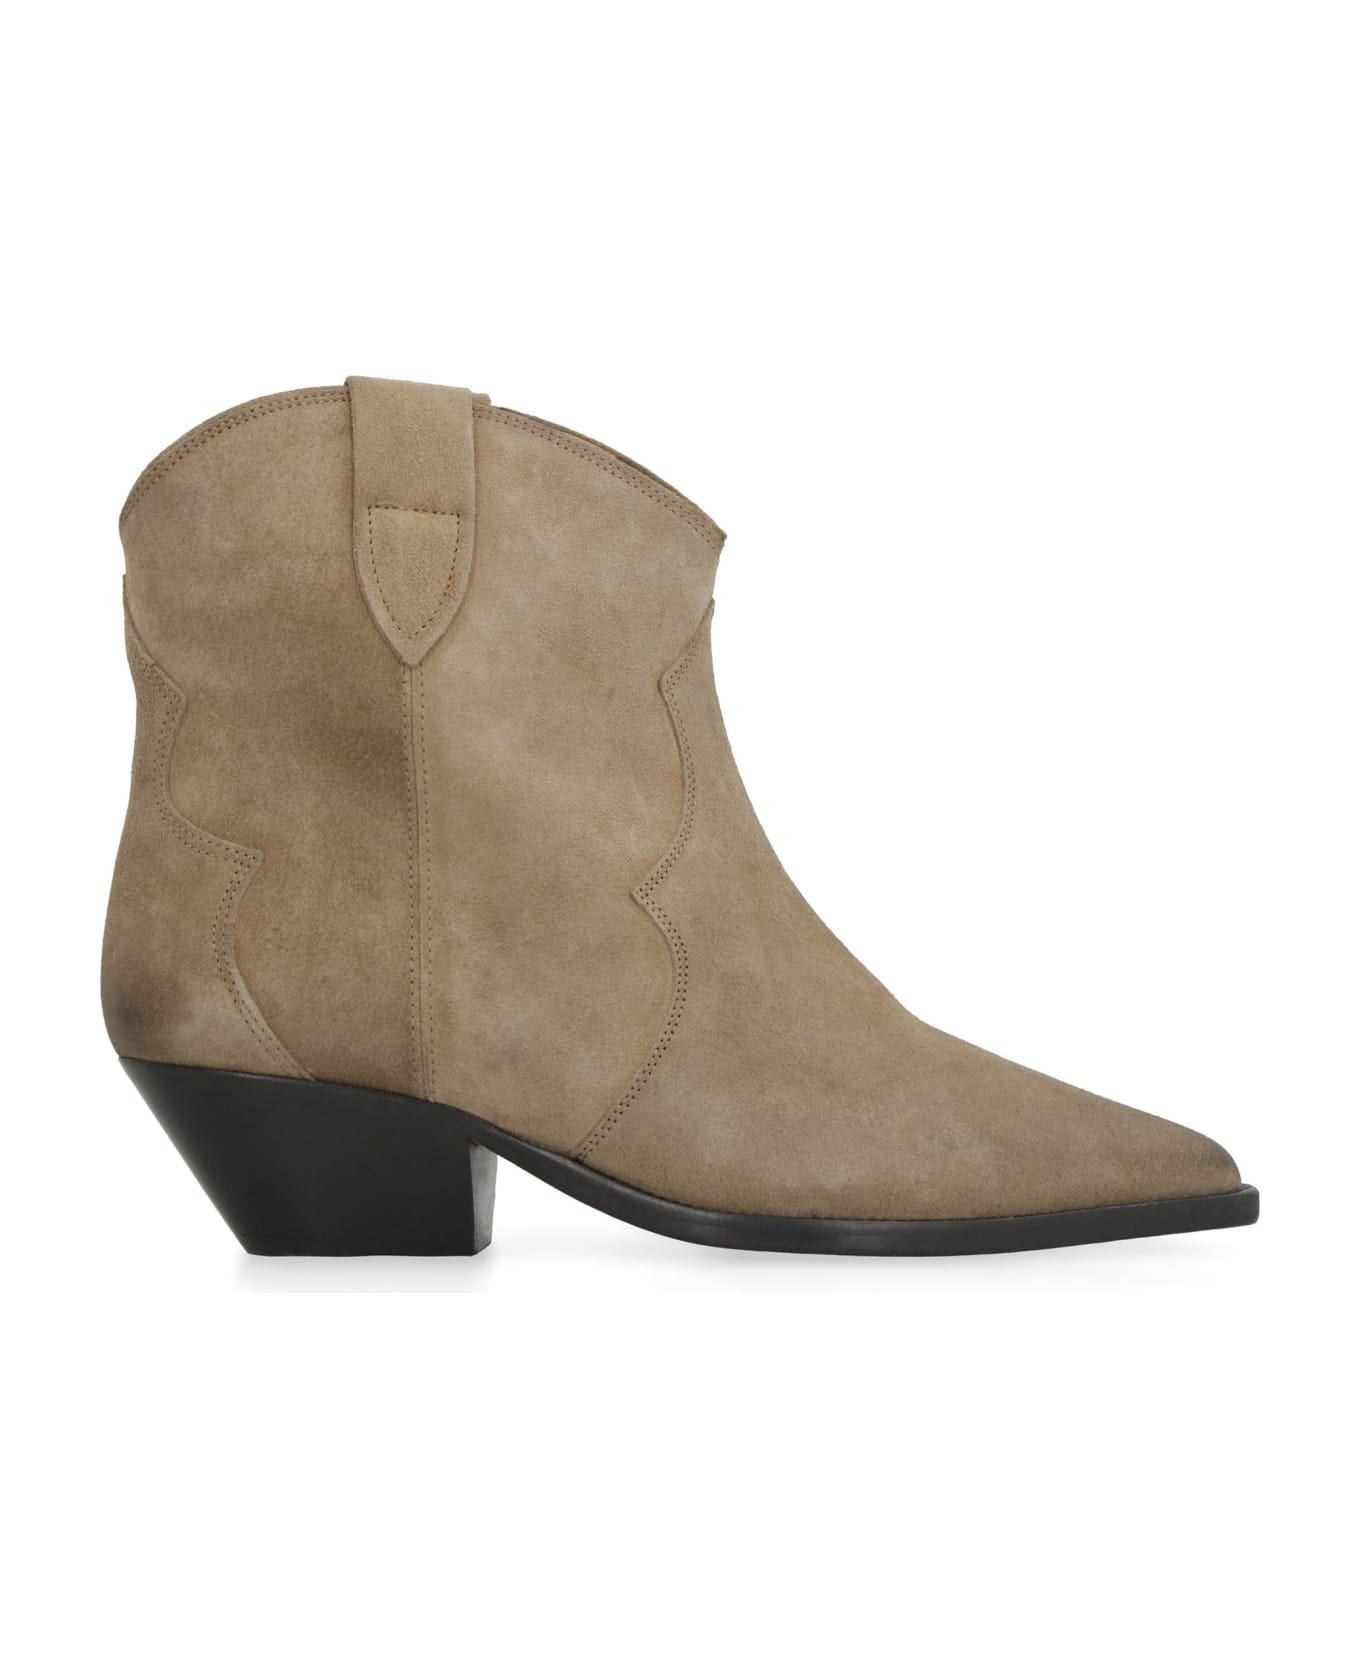 Isabel Marant Dewina Suede Ankle Boots - Dove Grey ブーツ